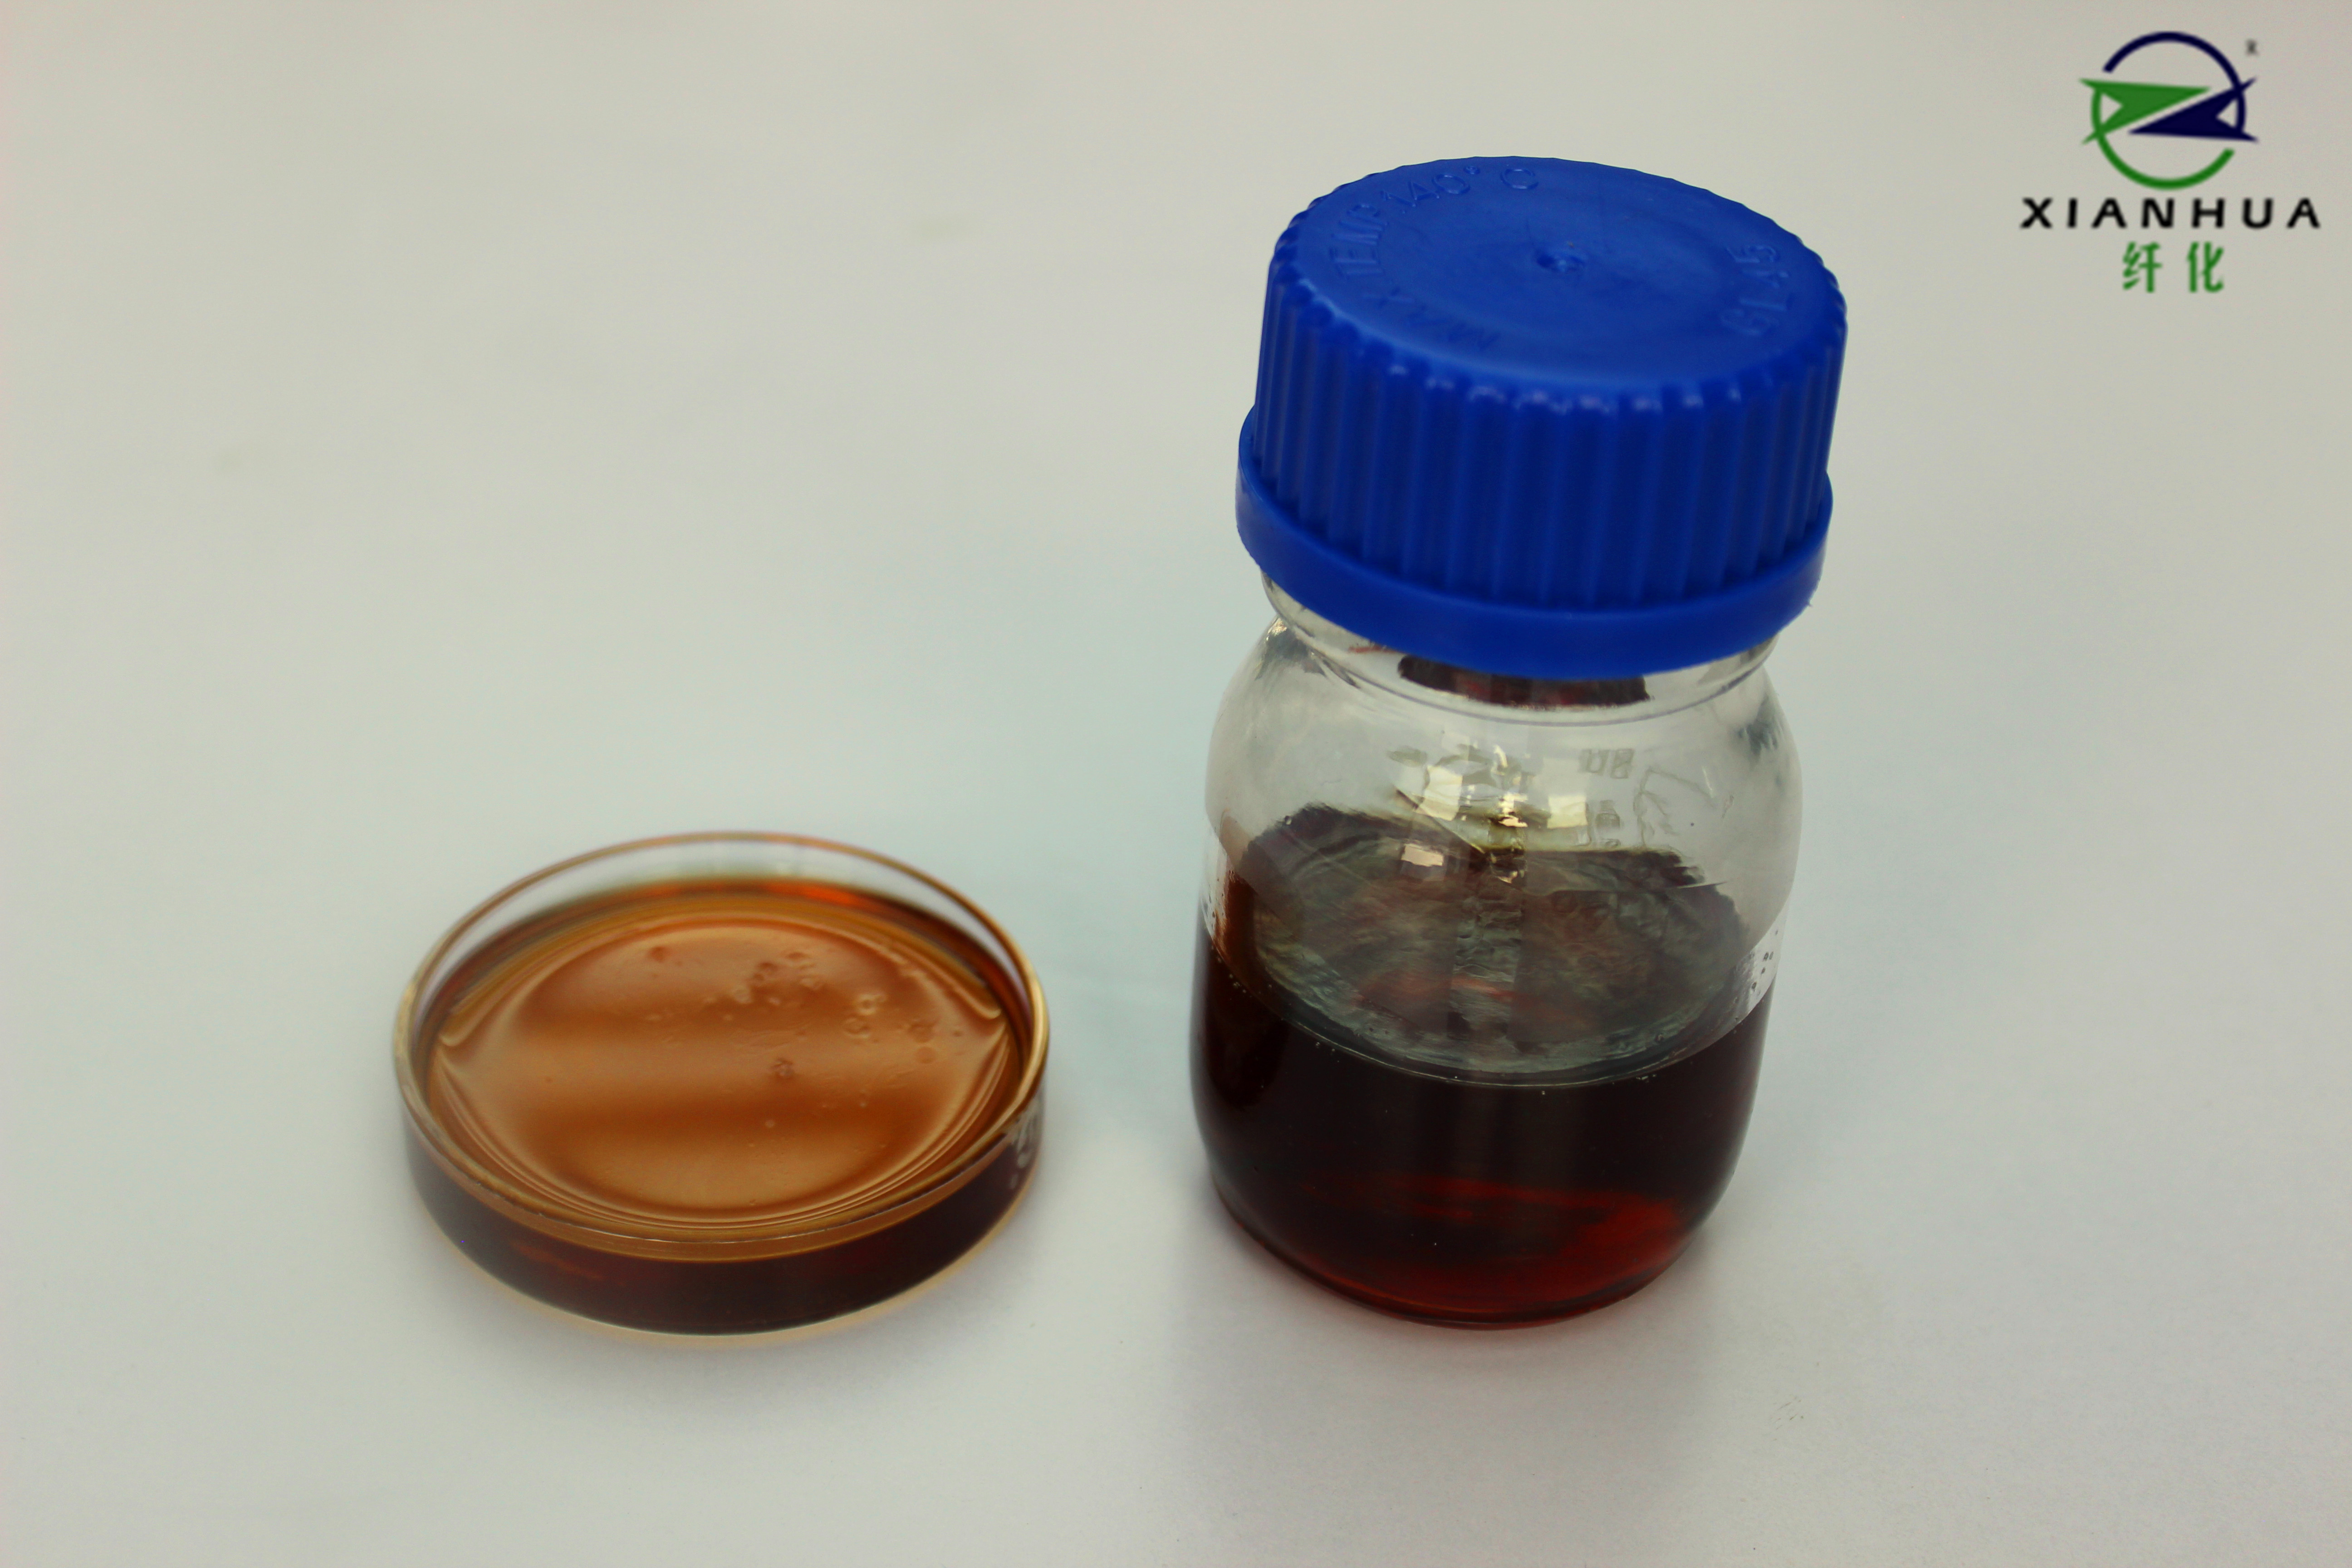  Industrial Non Formaldehyde Color Fixing Agent Liquid For Textile Dyeing Auxiliaries Manufactures